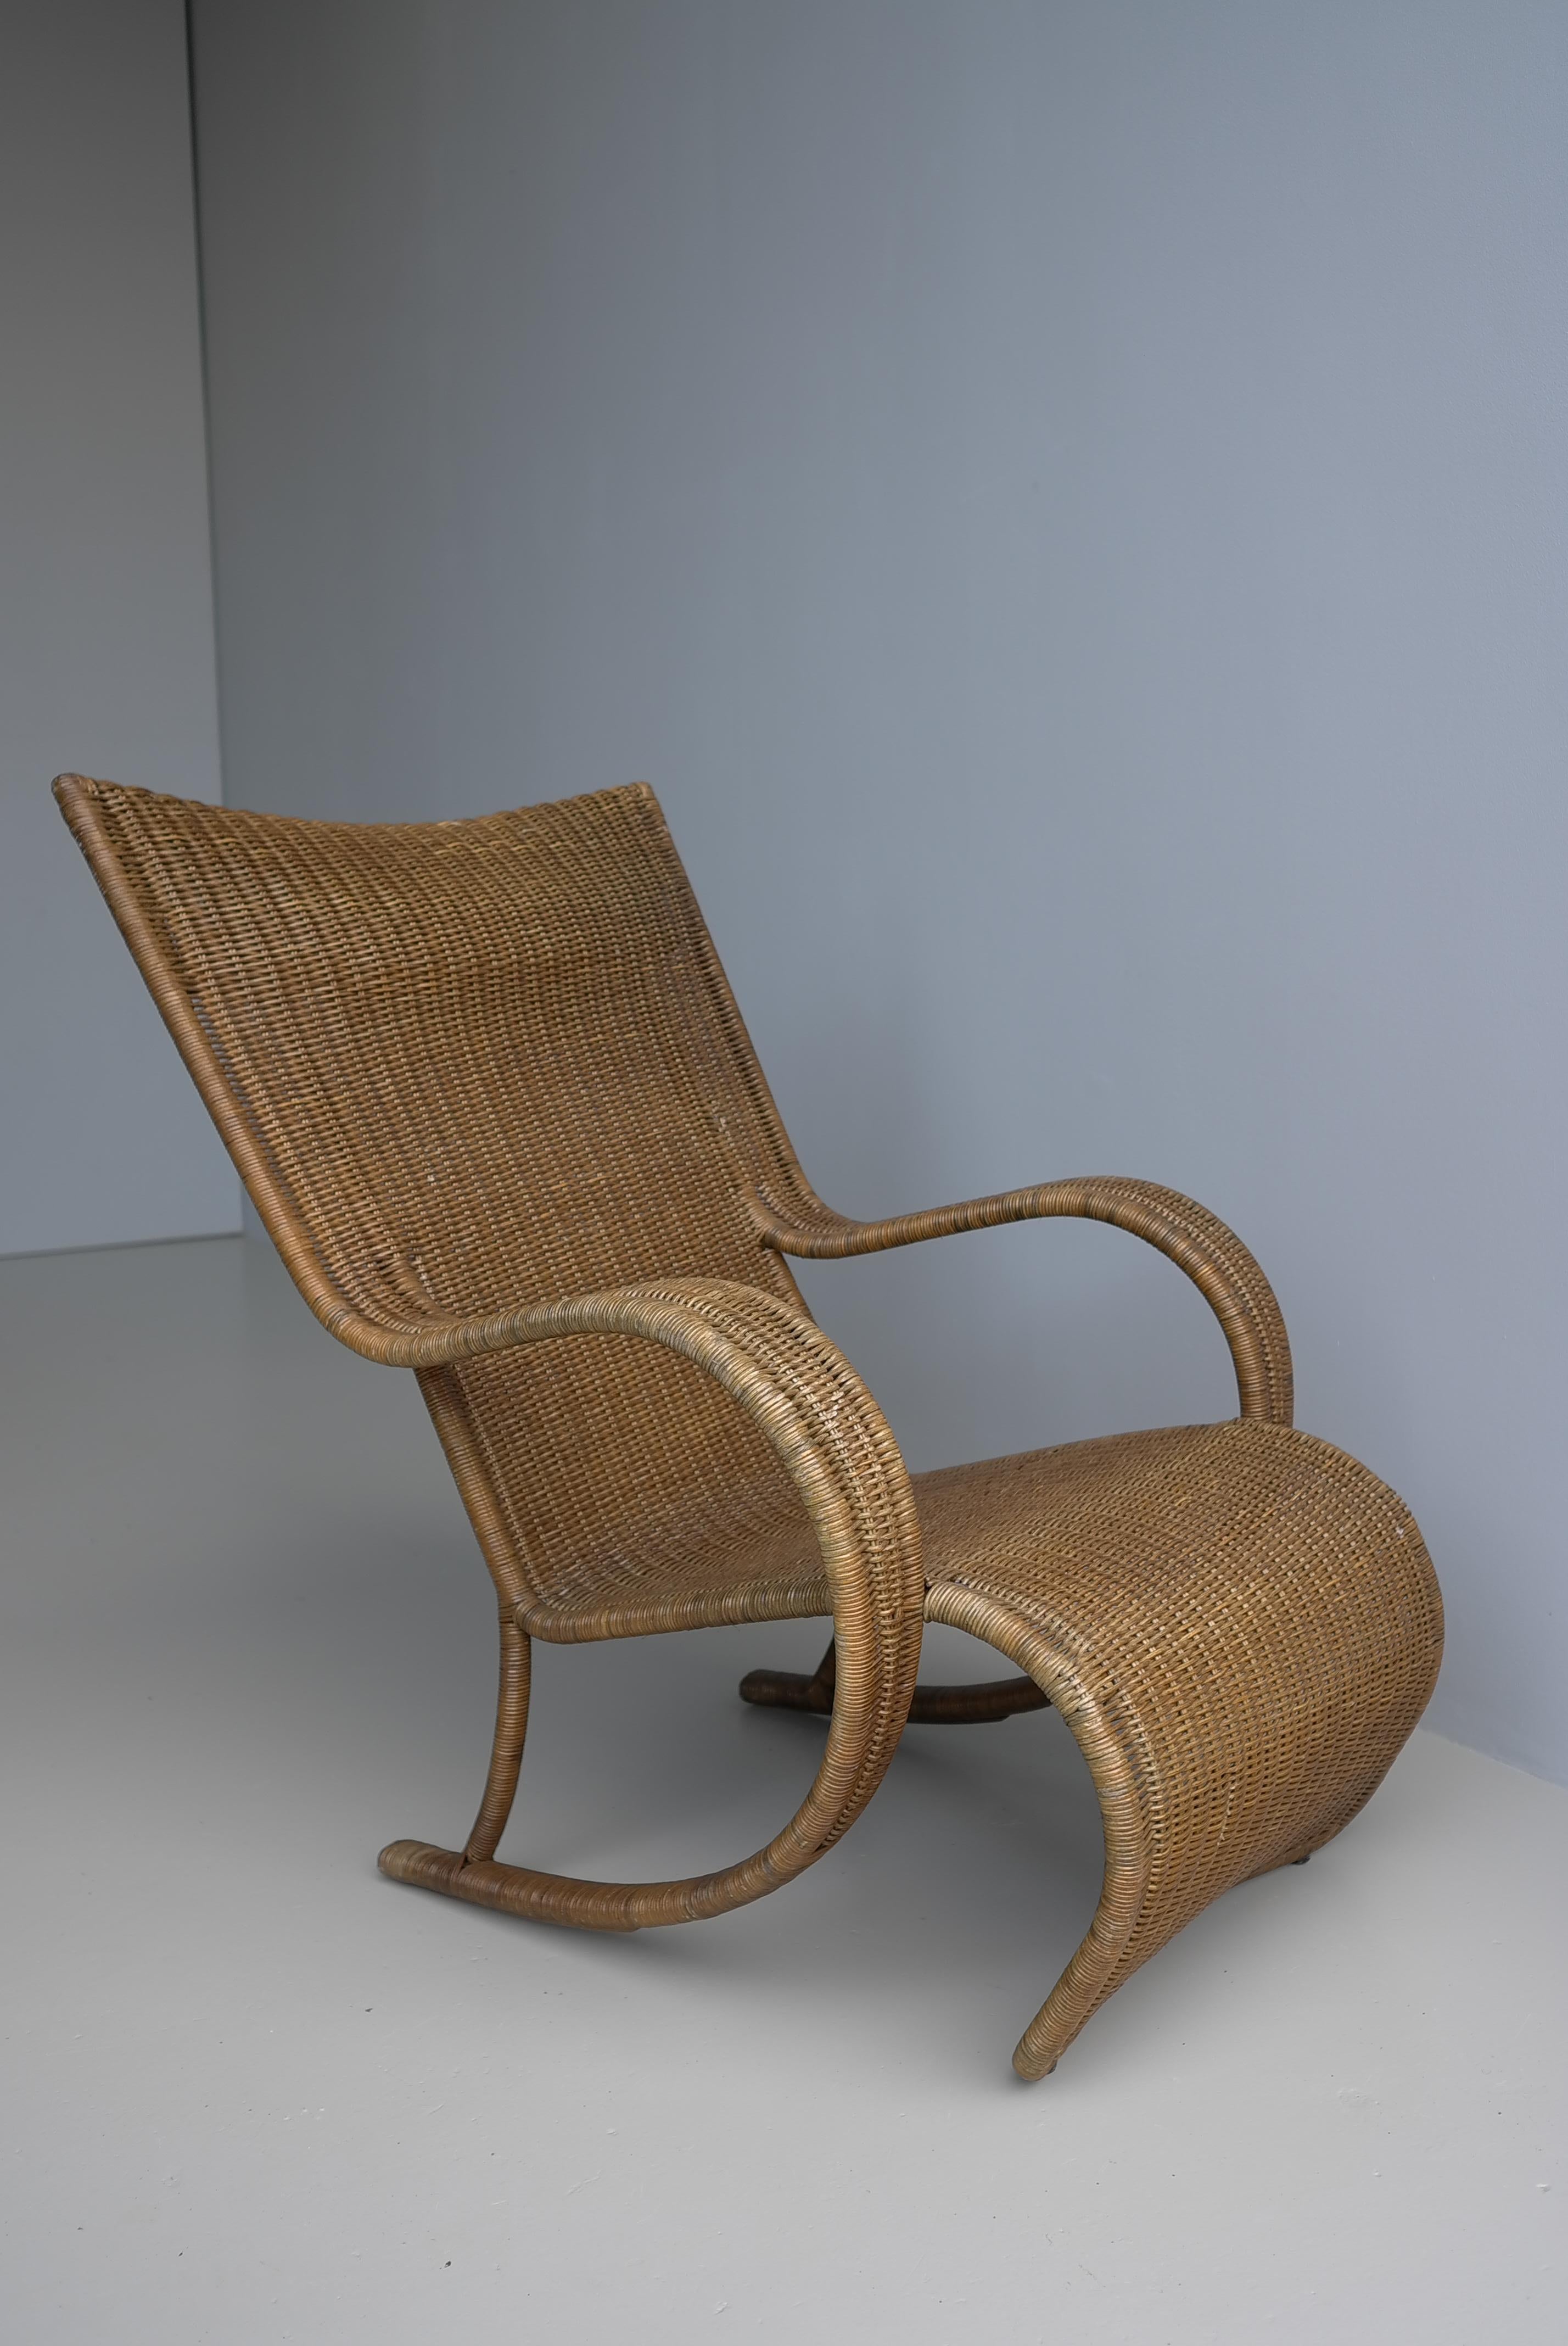 Large Sculptural Wicker Lounge Chair, France circa 1970 In Good Condition For Sale In Den Haag, NL